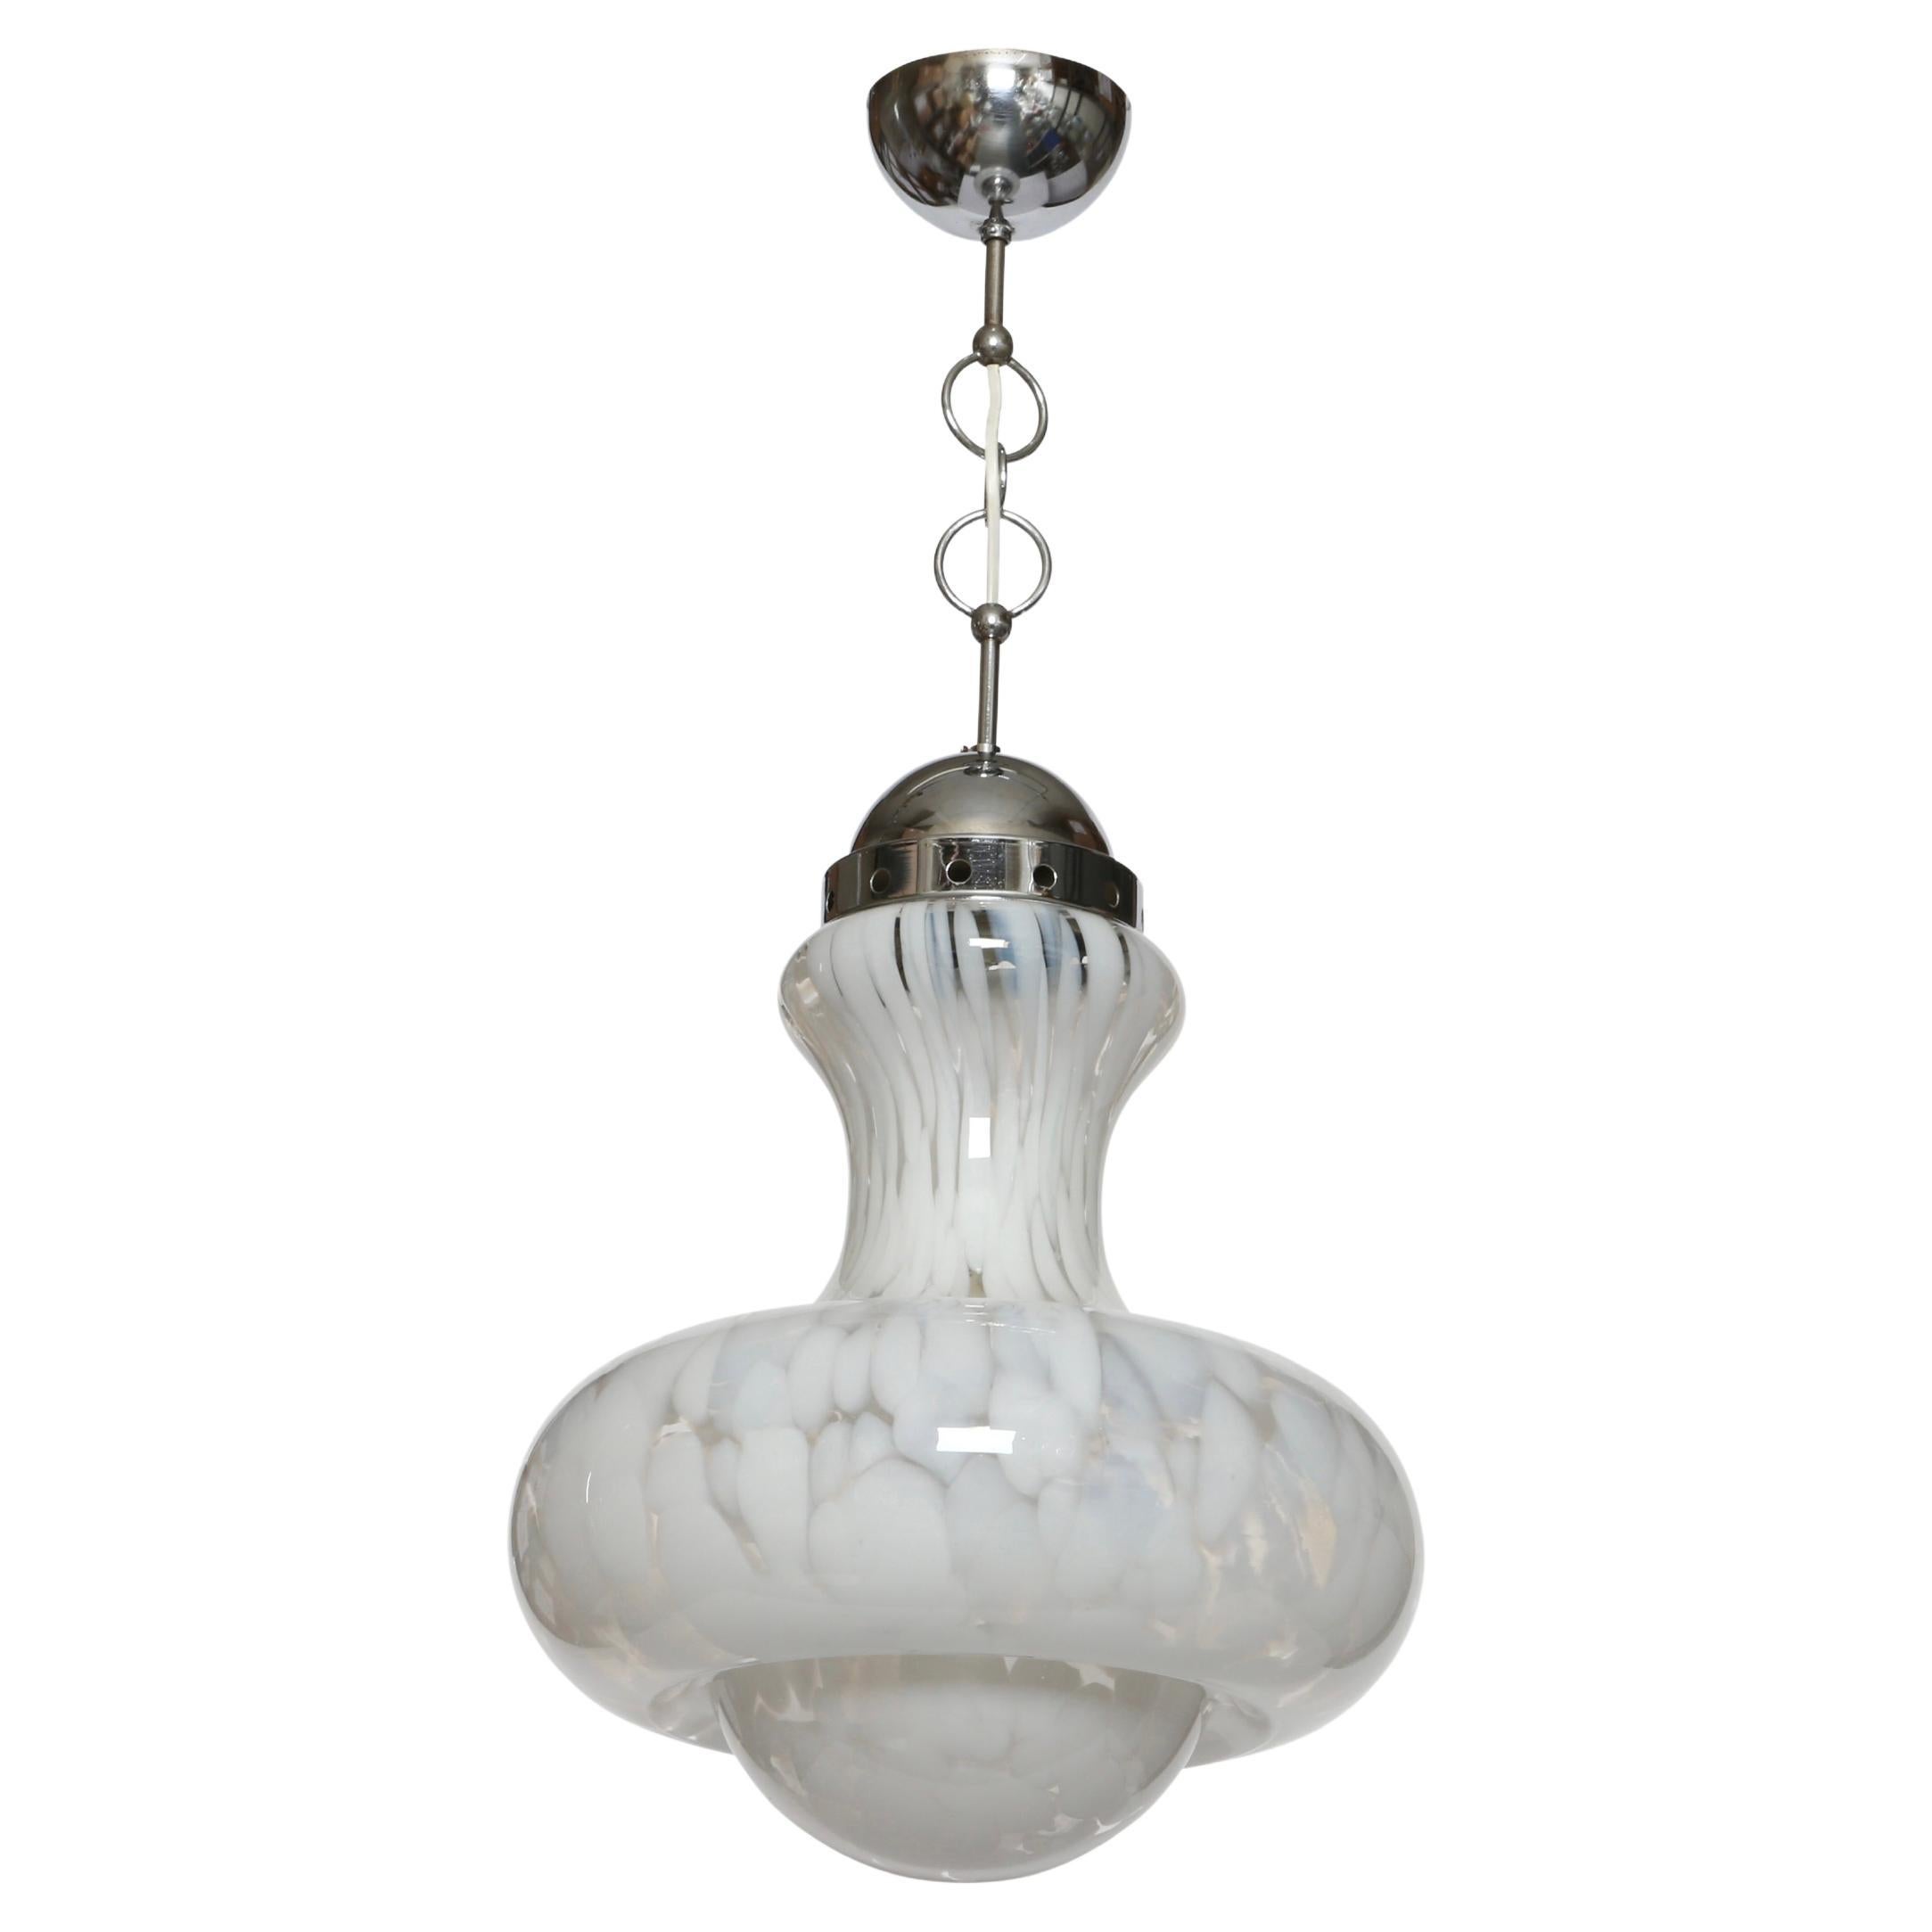 Murano Glass Ceiling Pendant by Mazzega, attributed